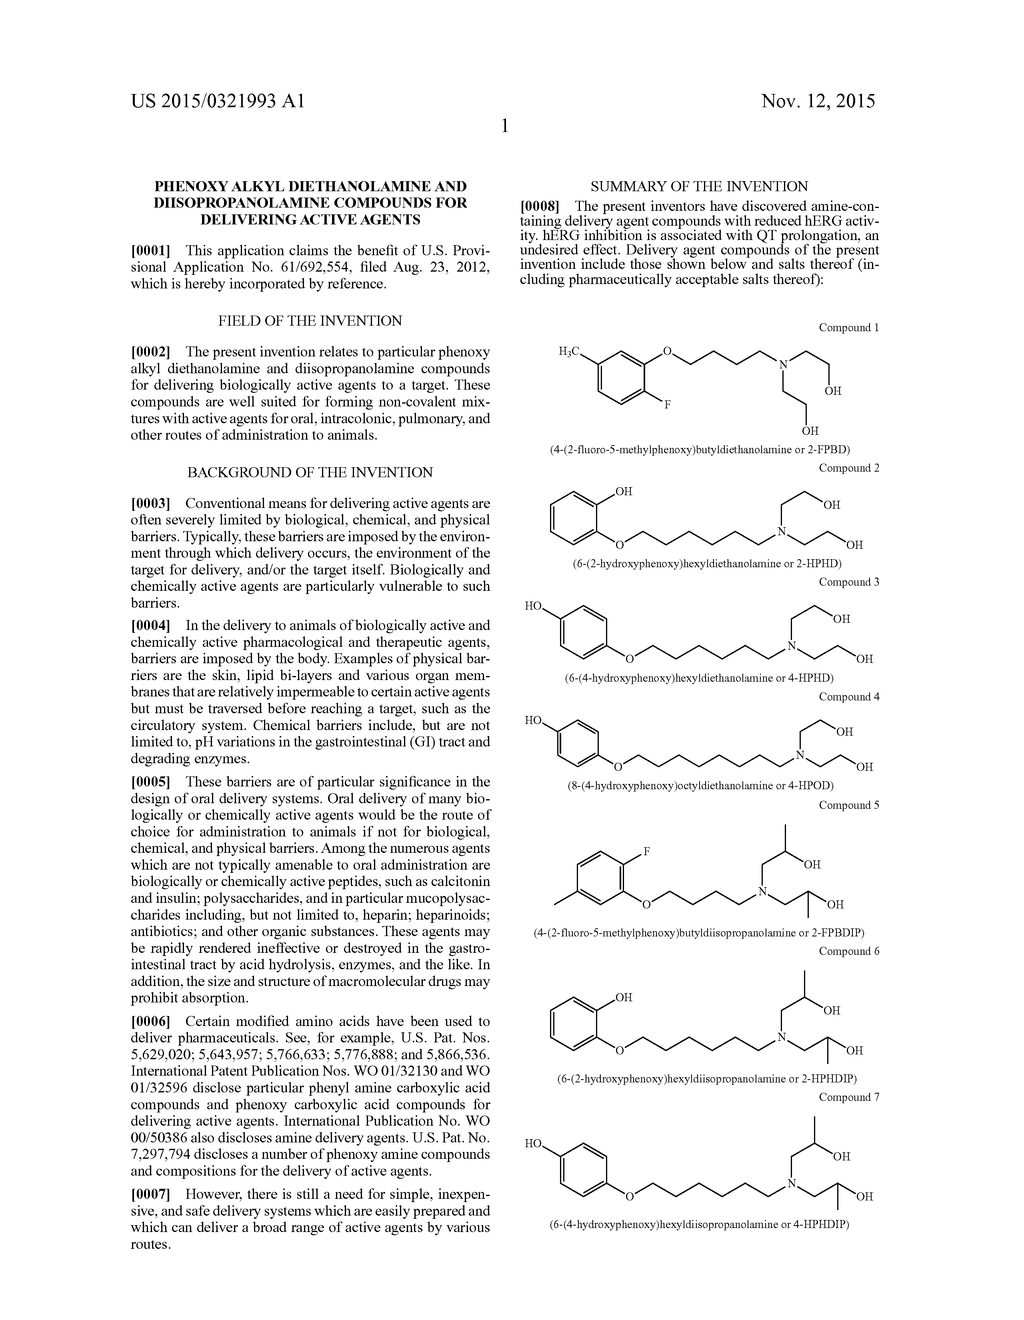 PHENOXY ALKYL DIETHANOLAMINE AND DIISOPROPANOLAMINE COMPOUNDS FOR     DELIVERING ACTIVE AGENTS - diagram, schematic, and image 02